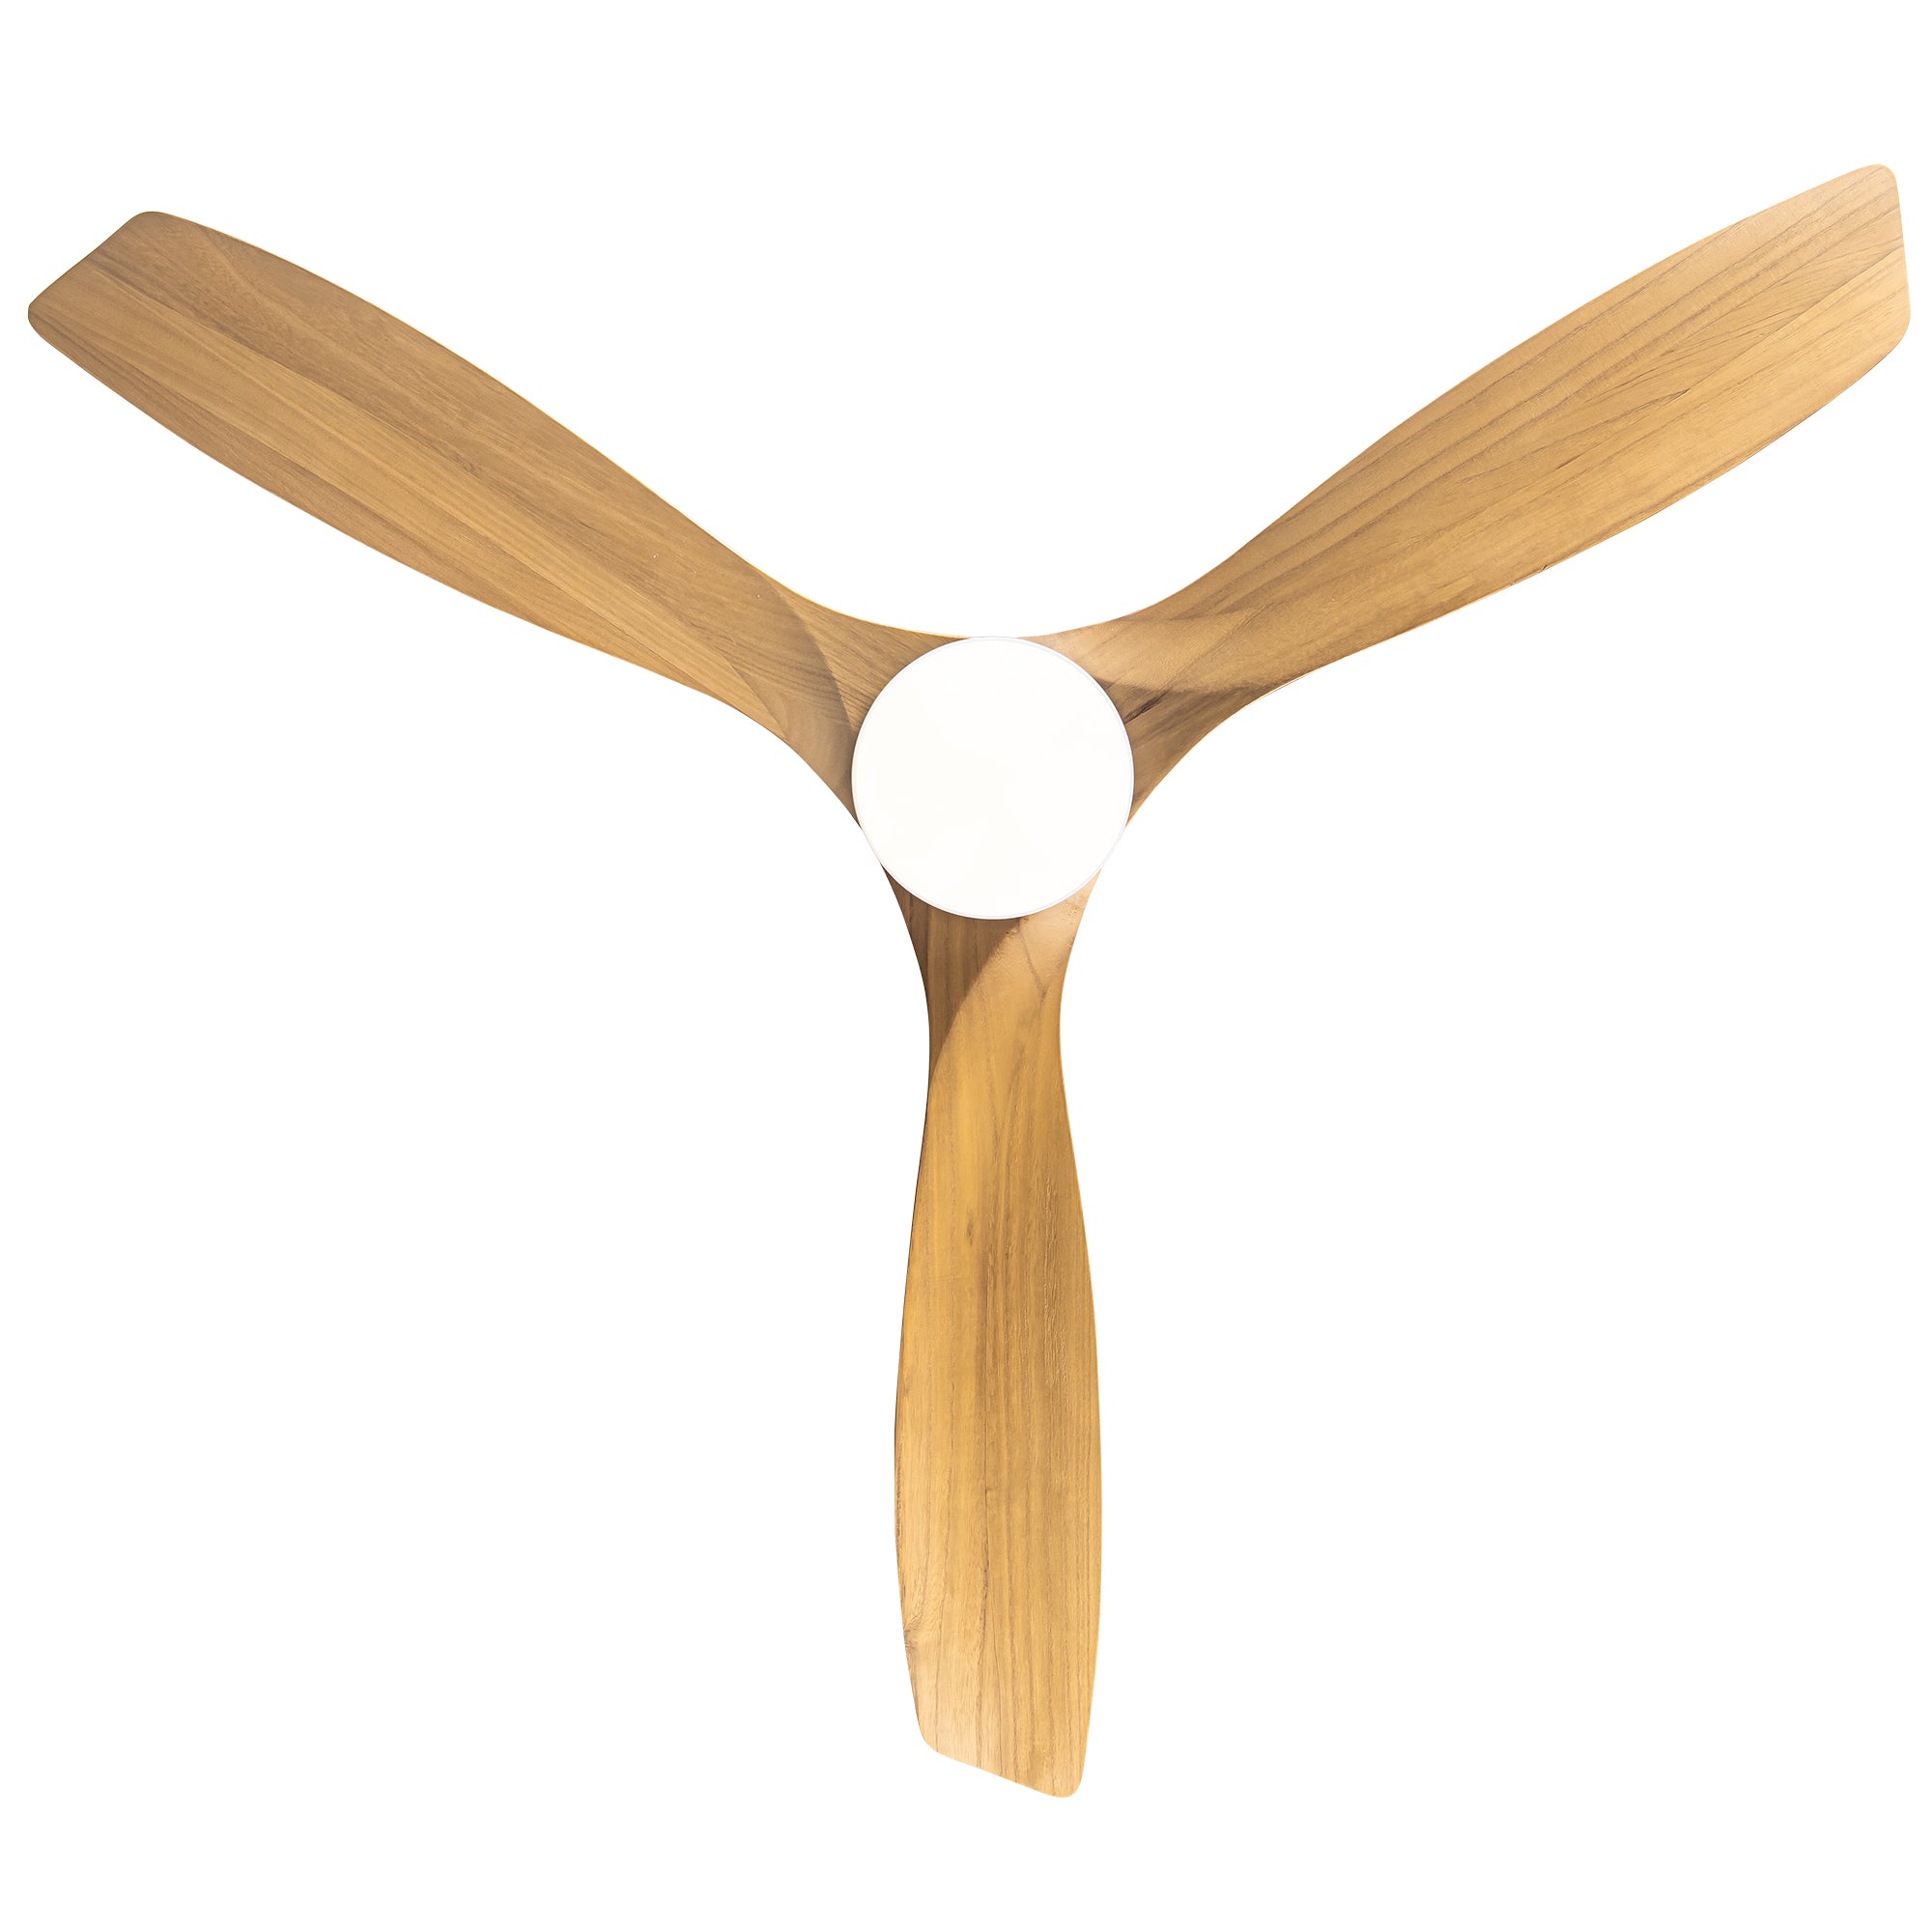 YUHAO 52 In.Intergrated LED Ceiling Fan Lighting with beige+yellow-abs